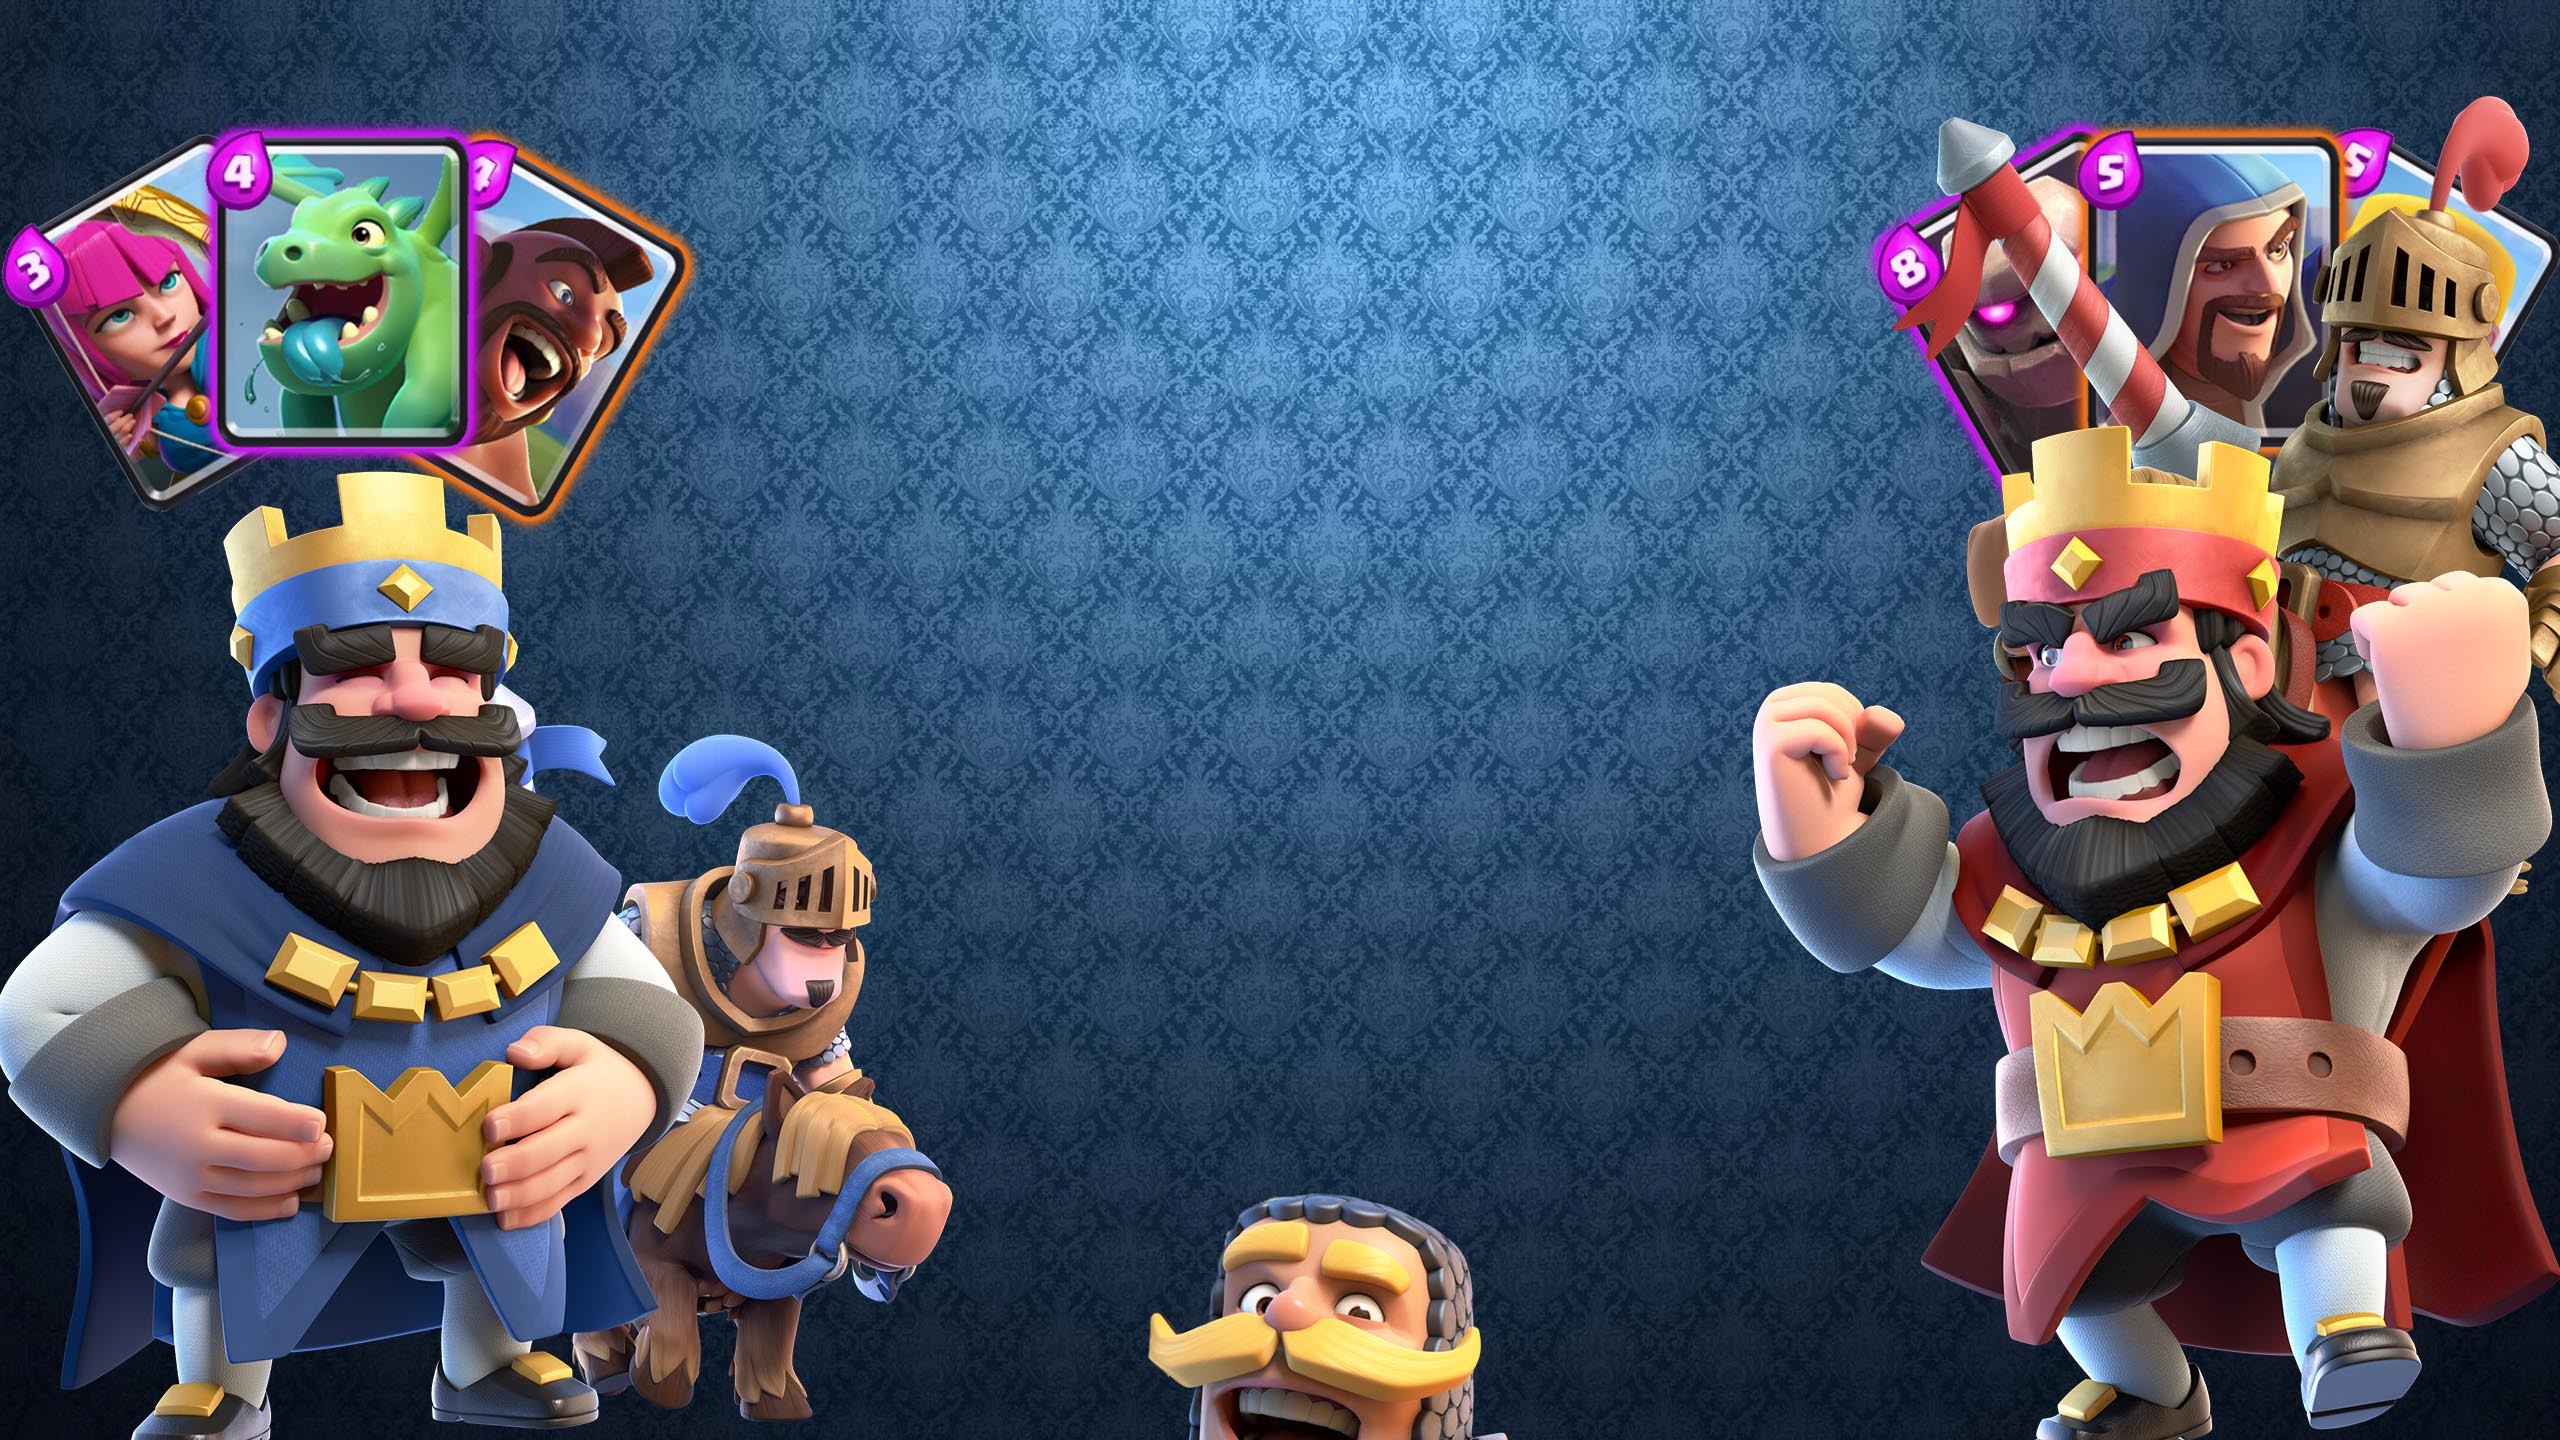 Video Game Clash Royale 2560x1440